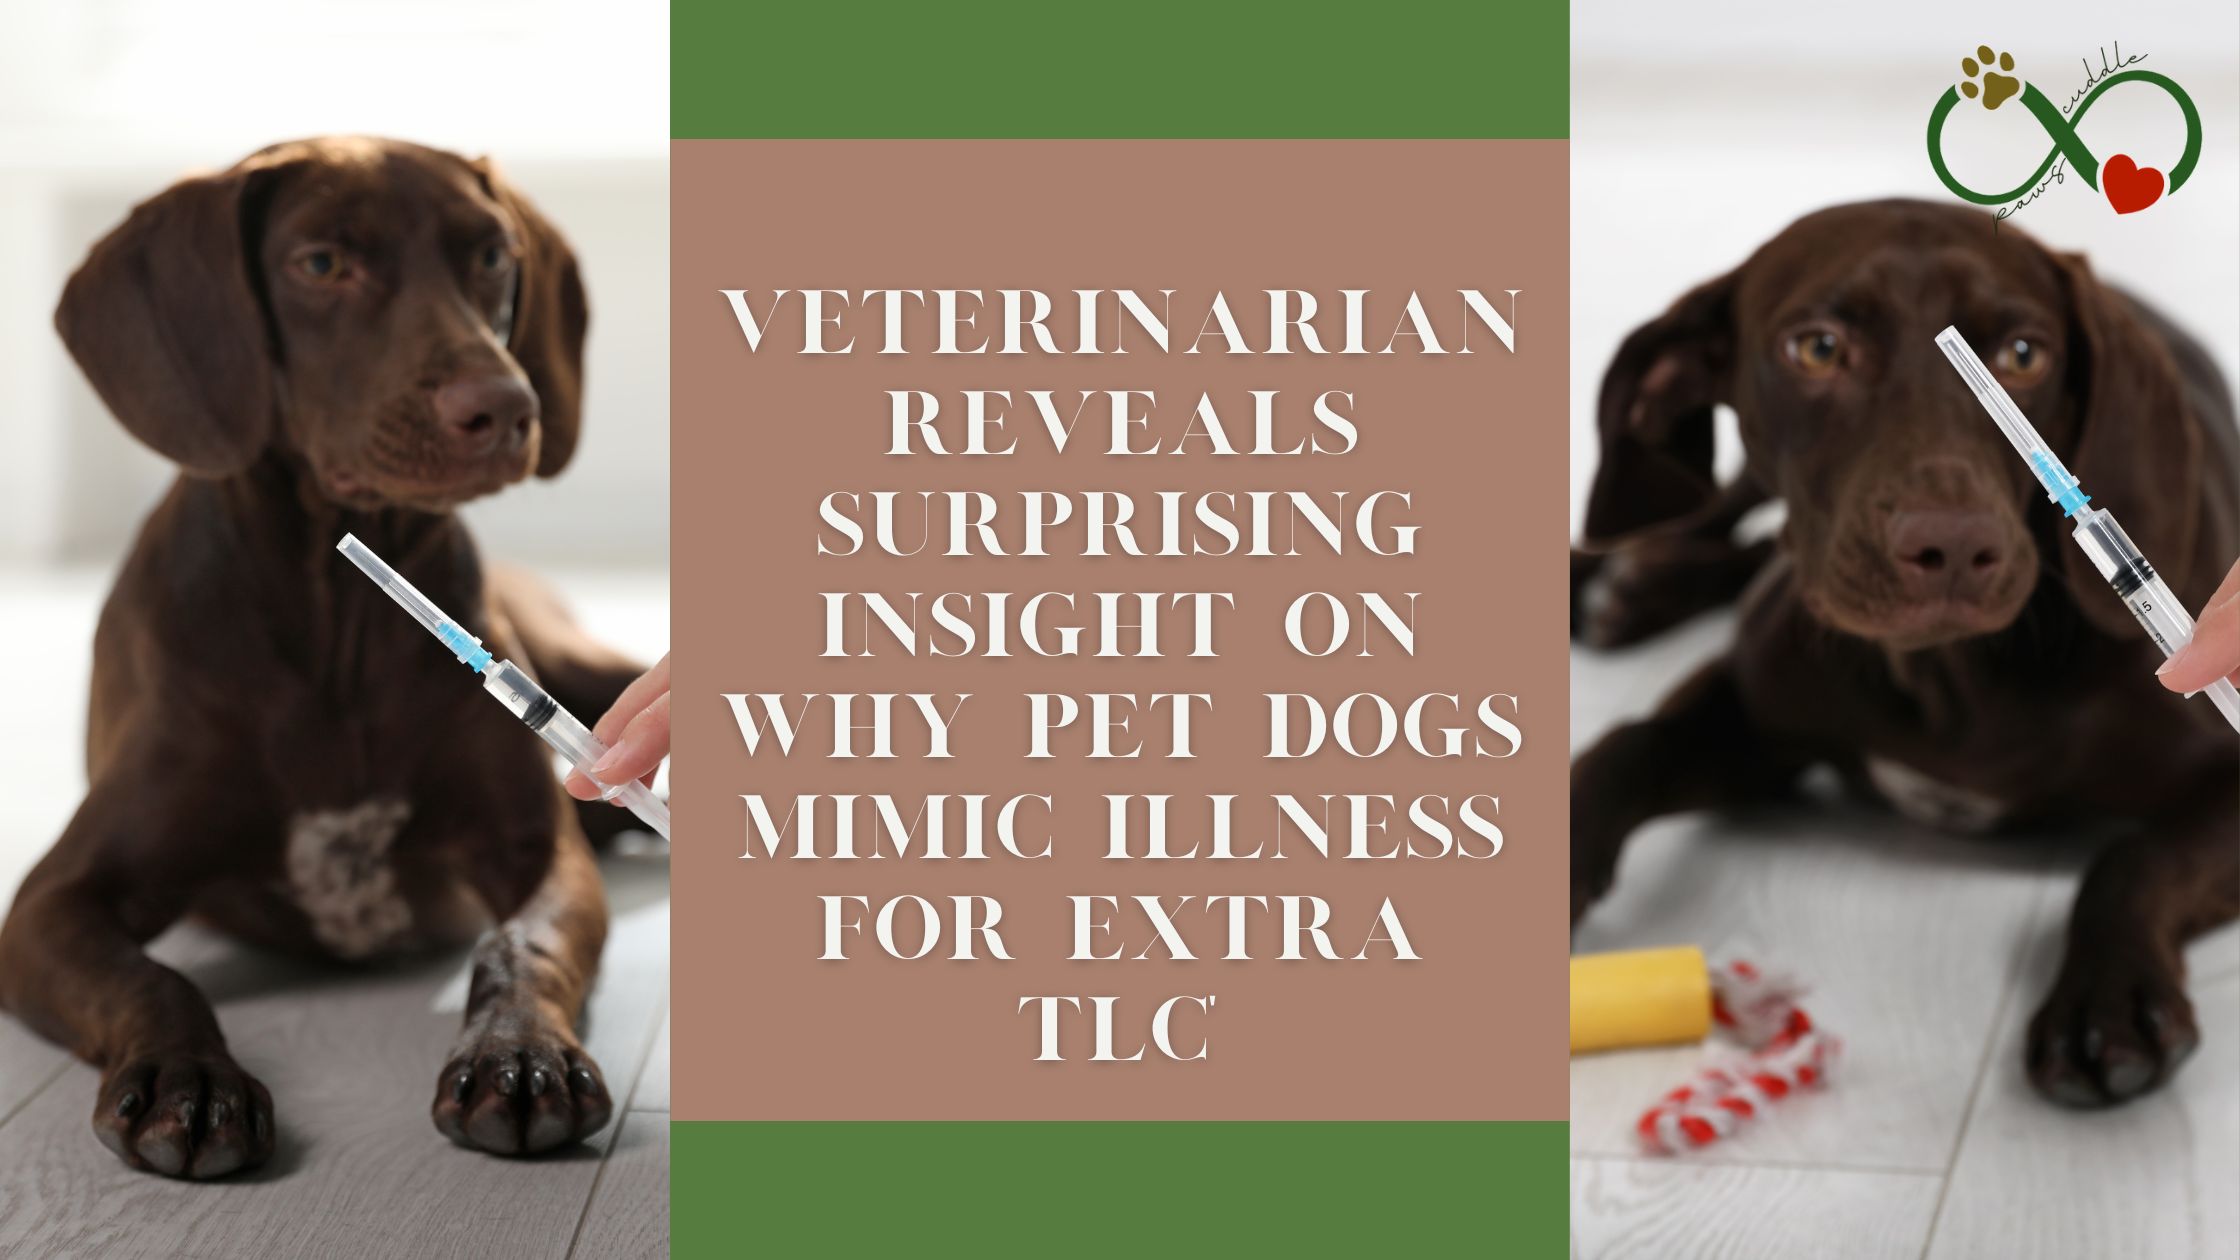 " Veterinarian Reveals Surprising Insight on Why Pet Dogs Mimic Illness for Extra TLC"